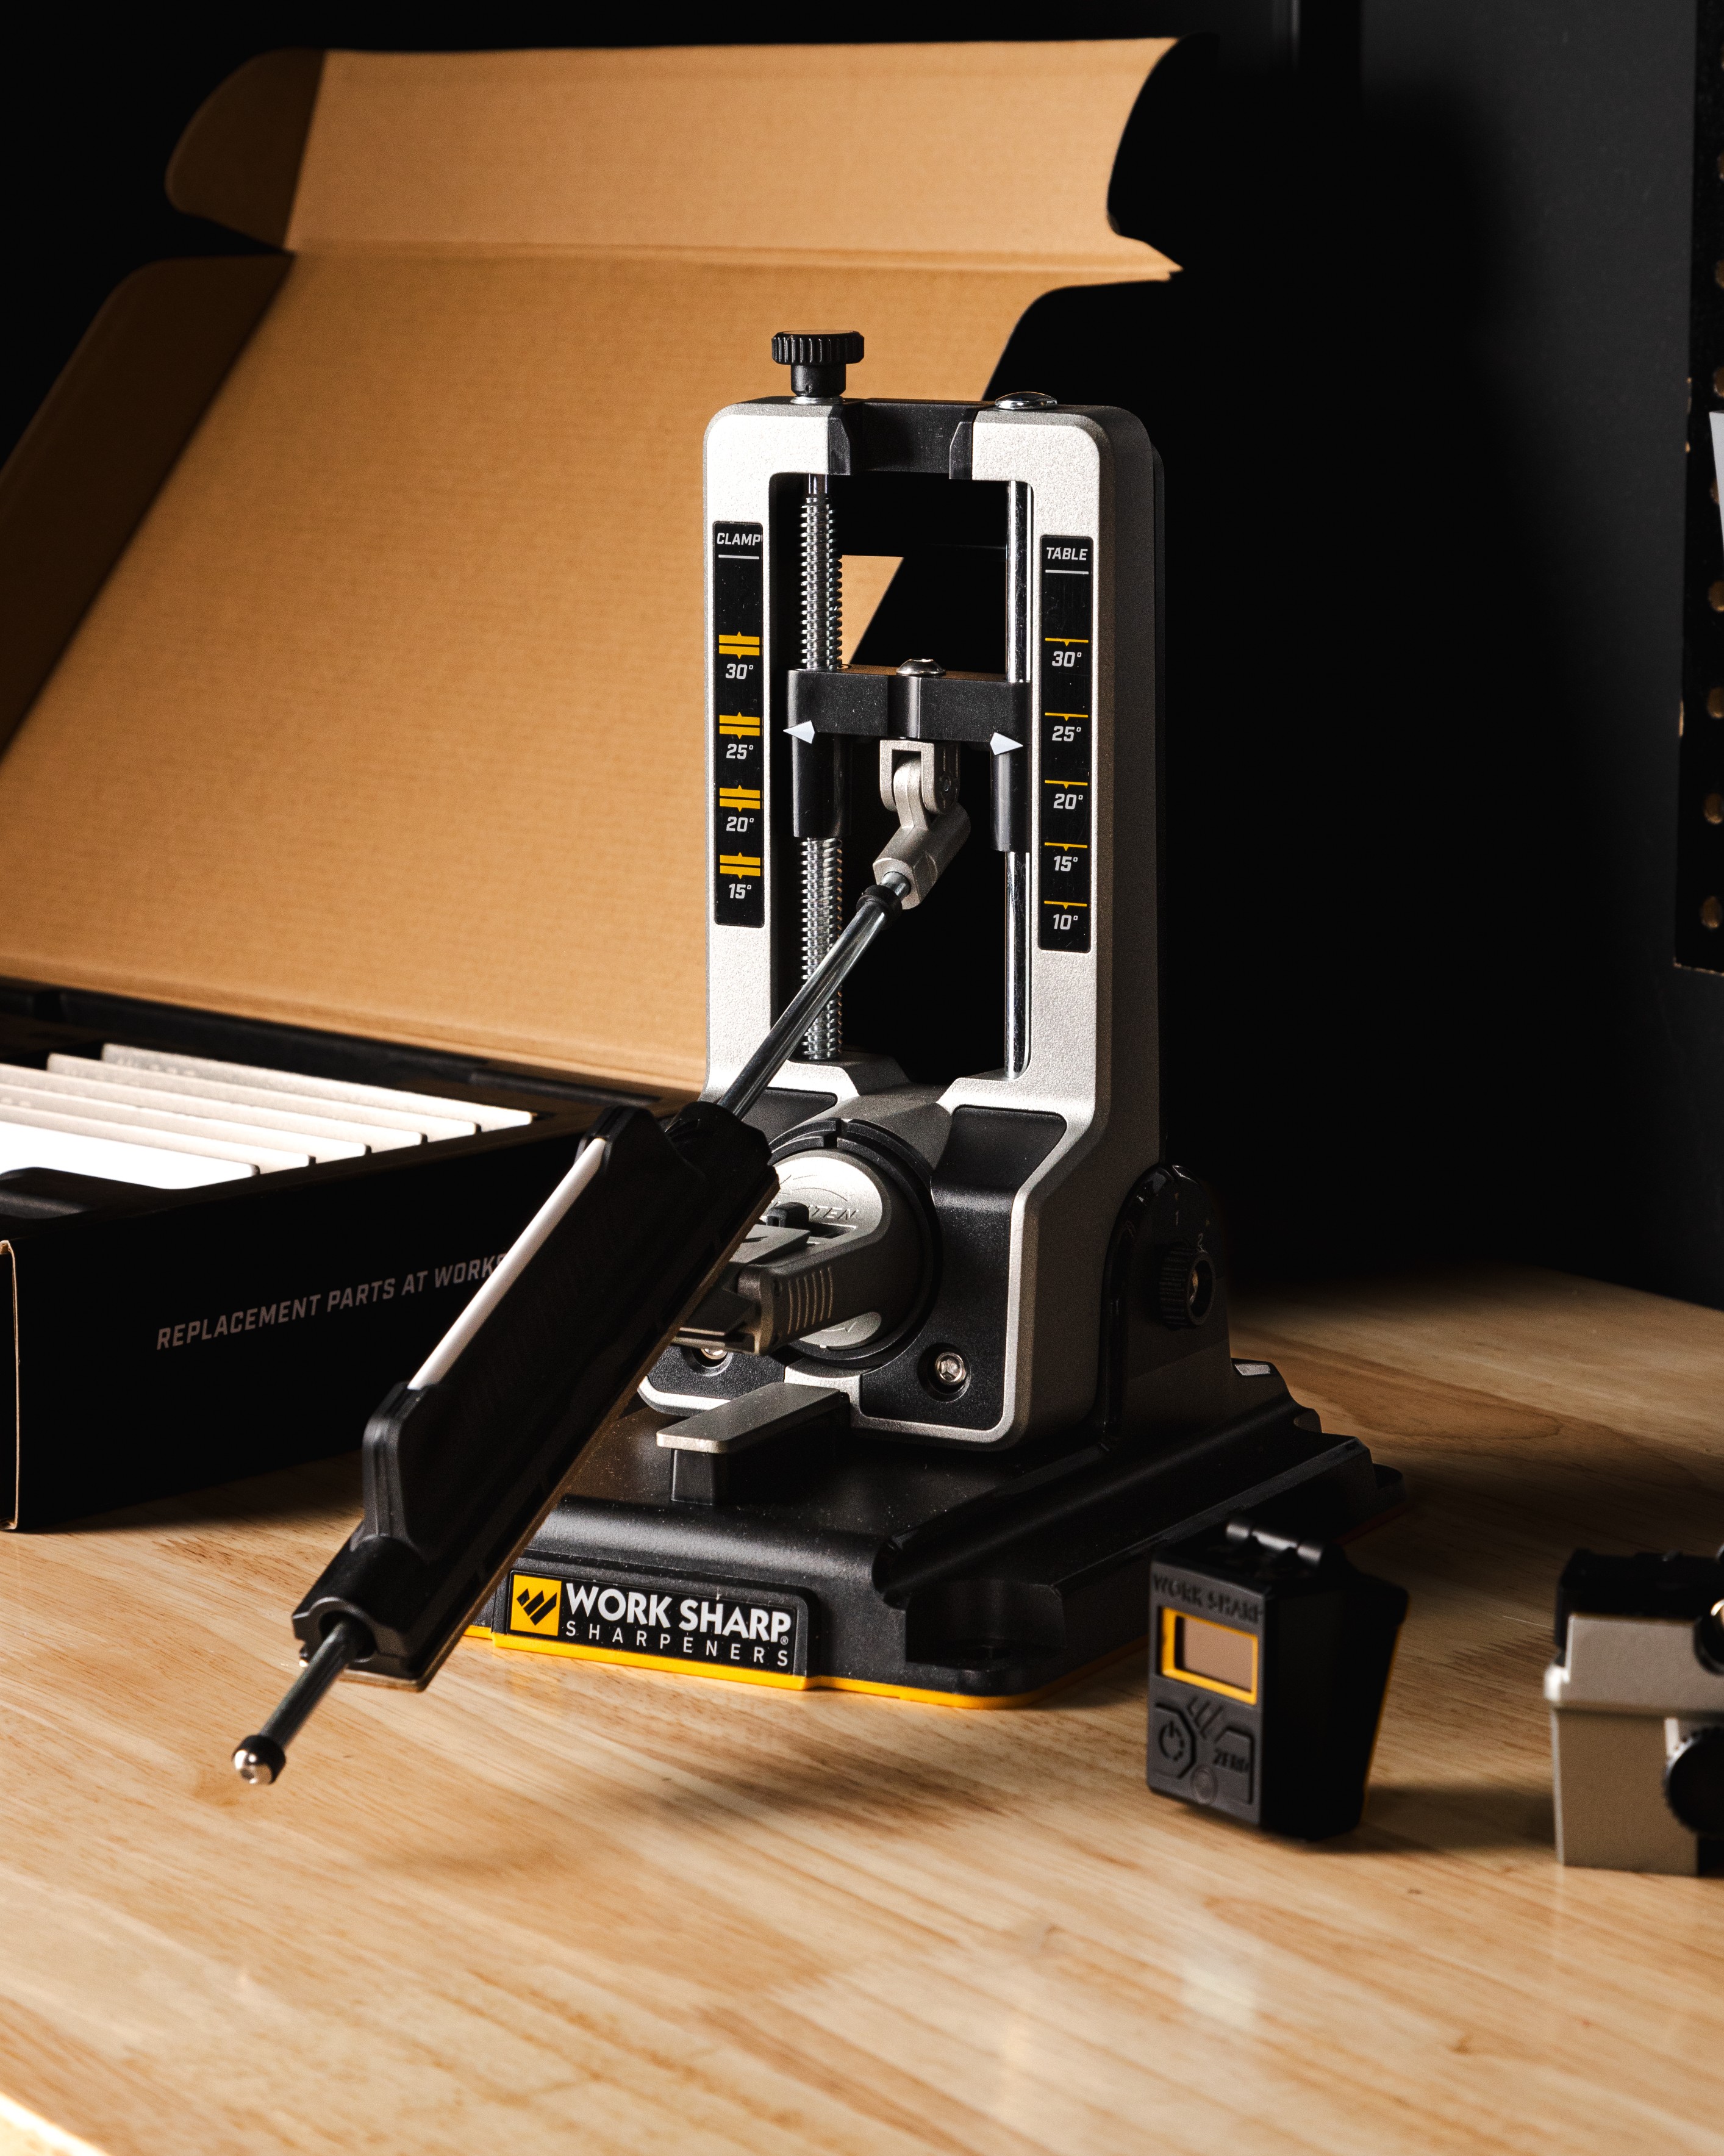 Blade HQ on X:  Knives are cool and all but you'll  eventually need to sharpen them. Choose from Worksharp's latest sharpeners!  The Work Sharp Professional Precision Adjust Knife Sharpener and the